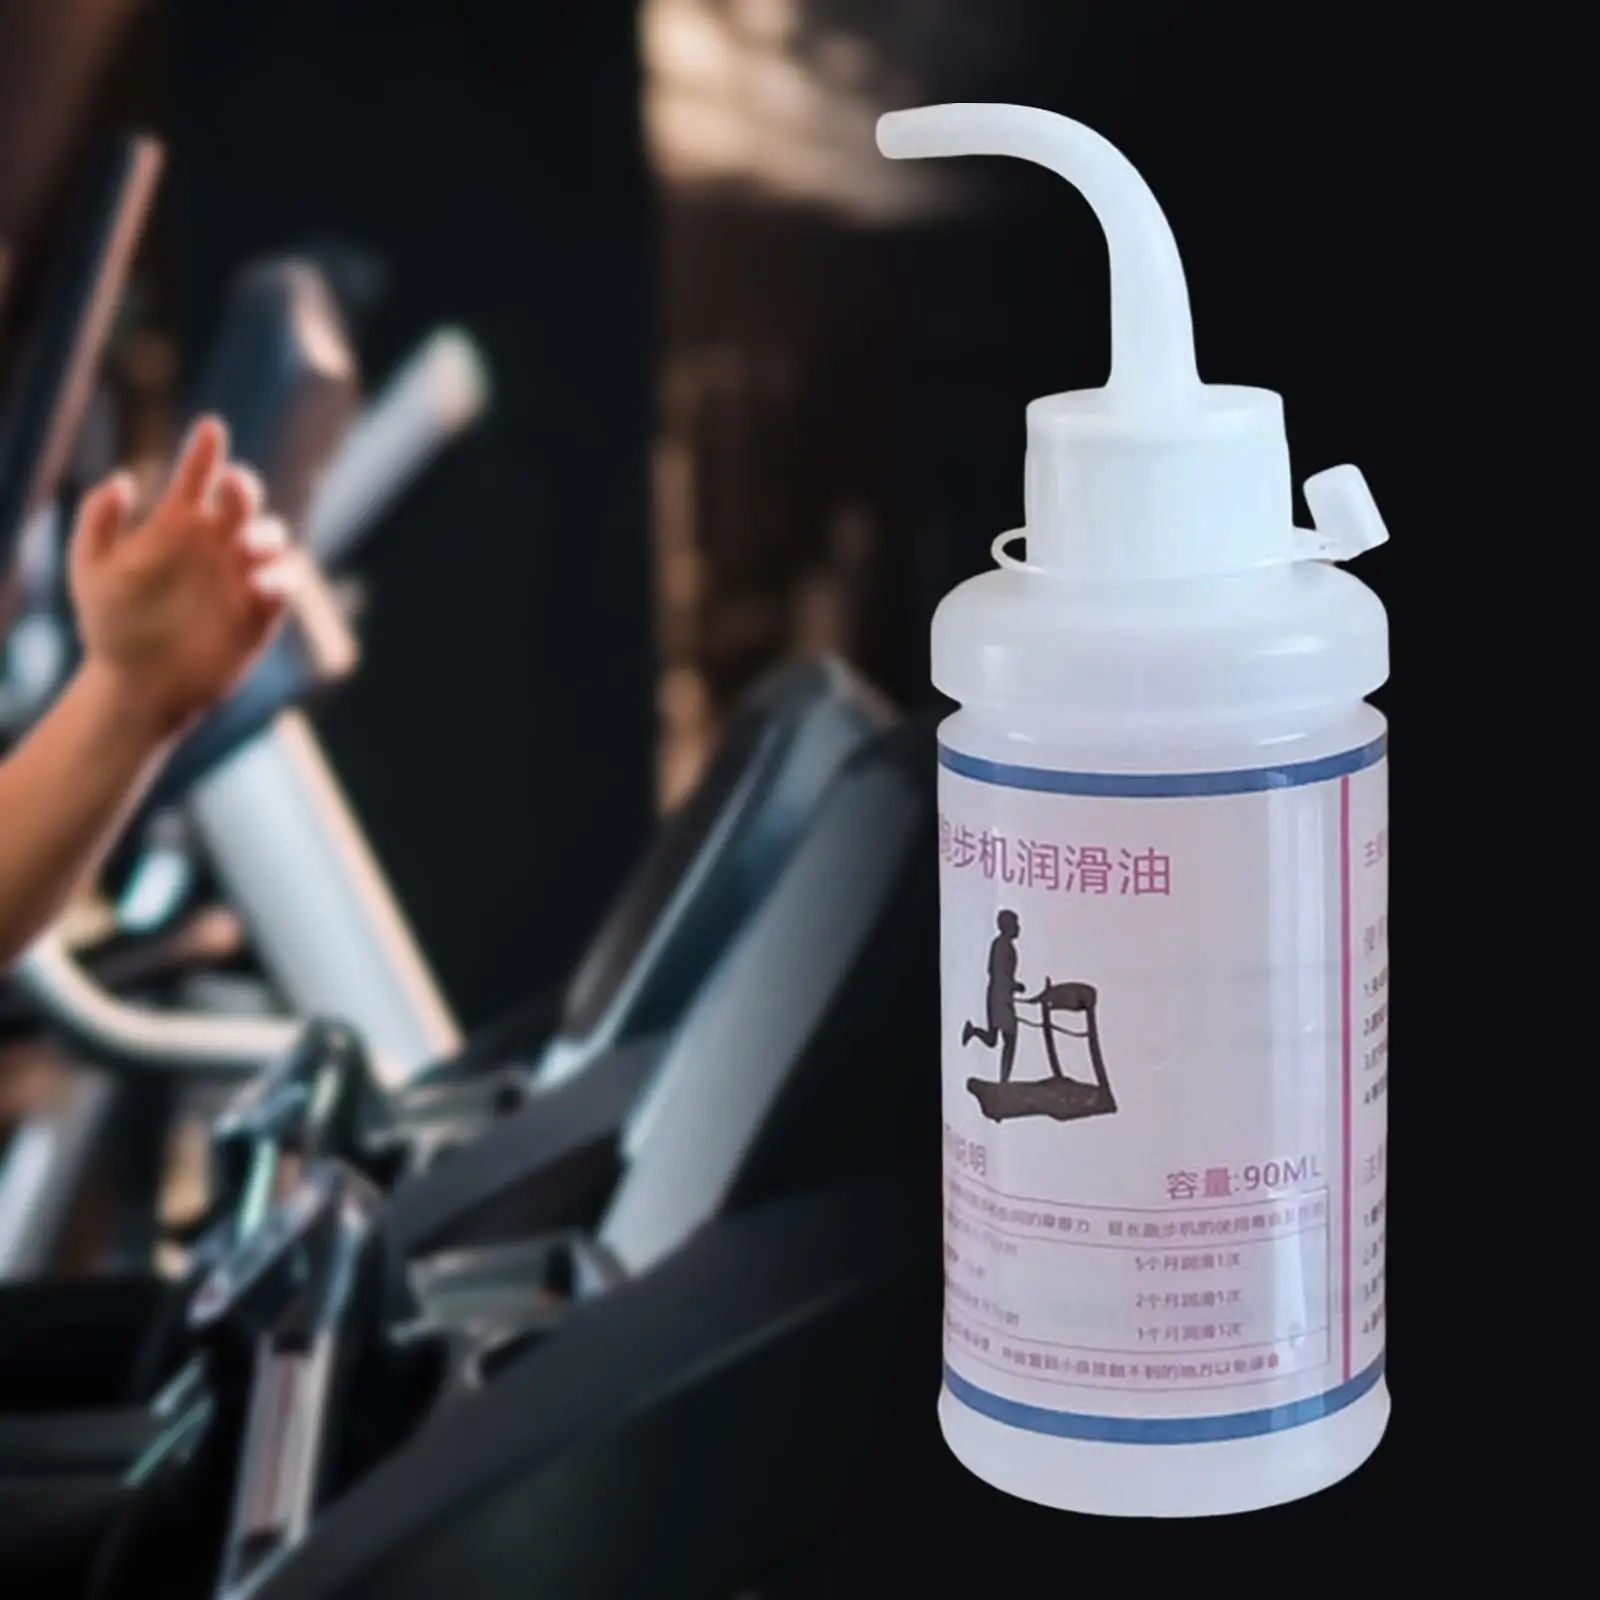 Treadmill Belt Lubricant Treadmill Belt Lubrication Lube Application 90ml for Most Treadmill Brands Home Gym Running Machine